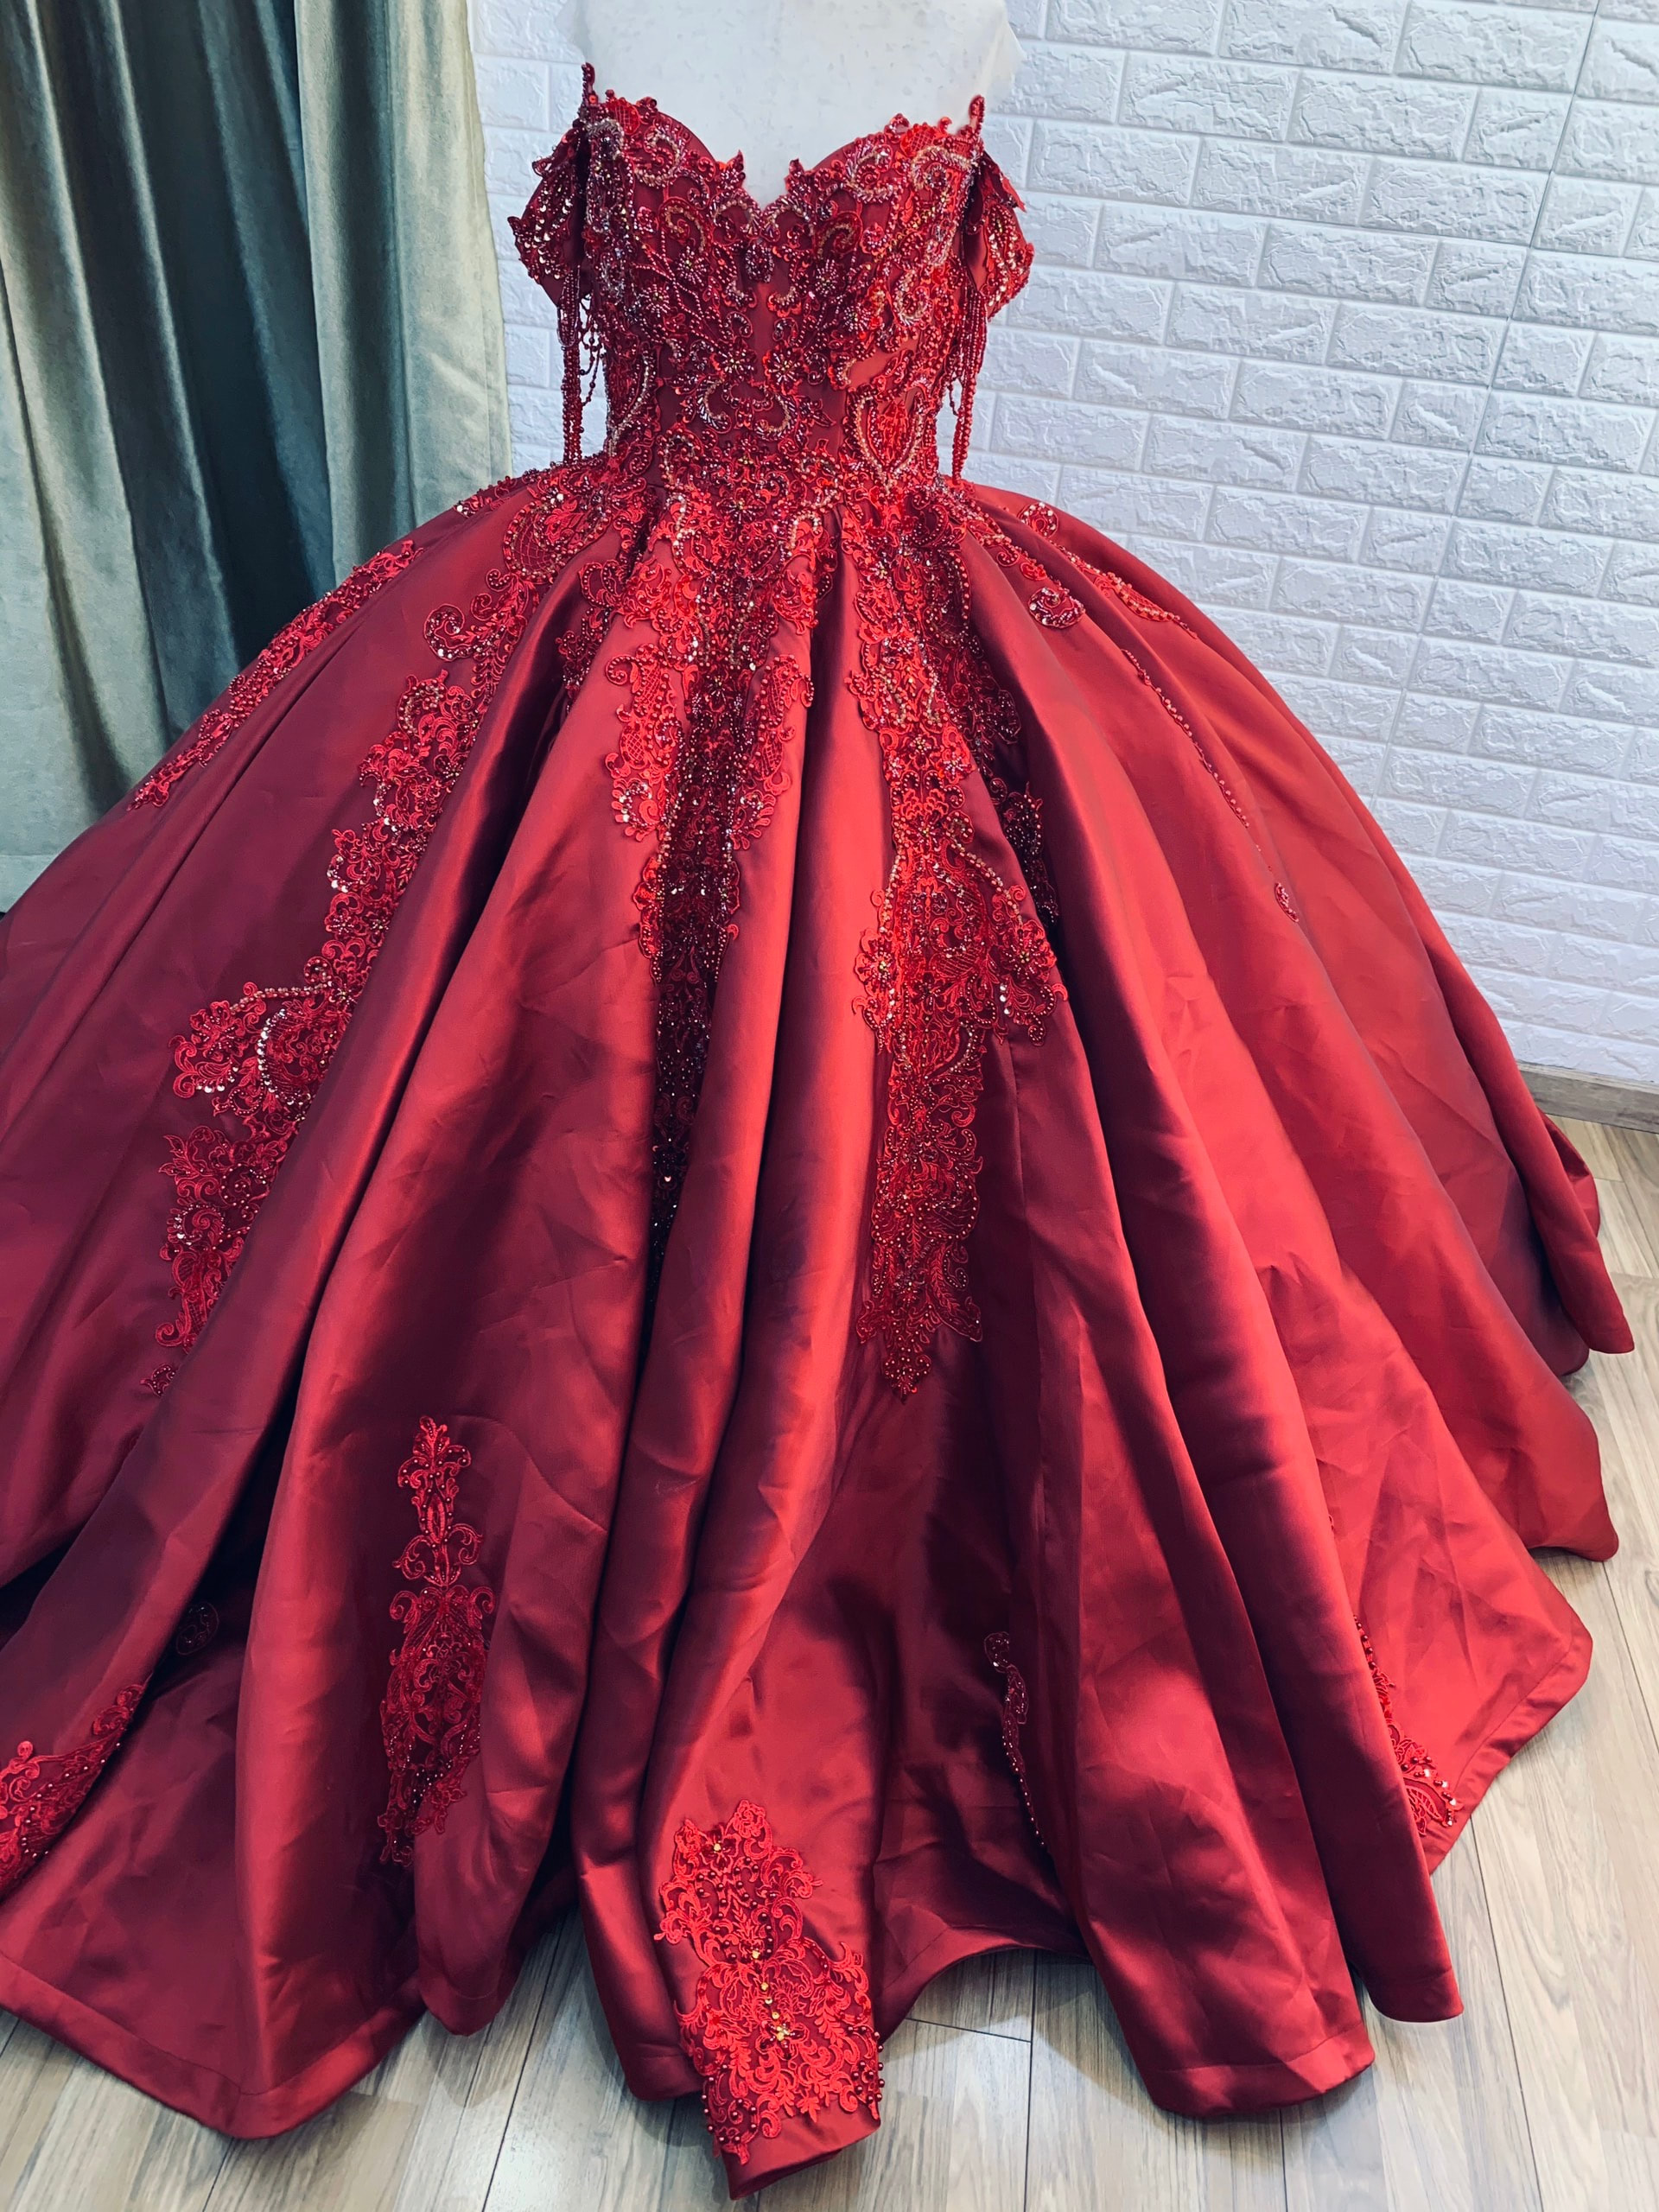 Red ball gown#vaish | Ball gowns, Red ball gowns, Red ball gown